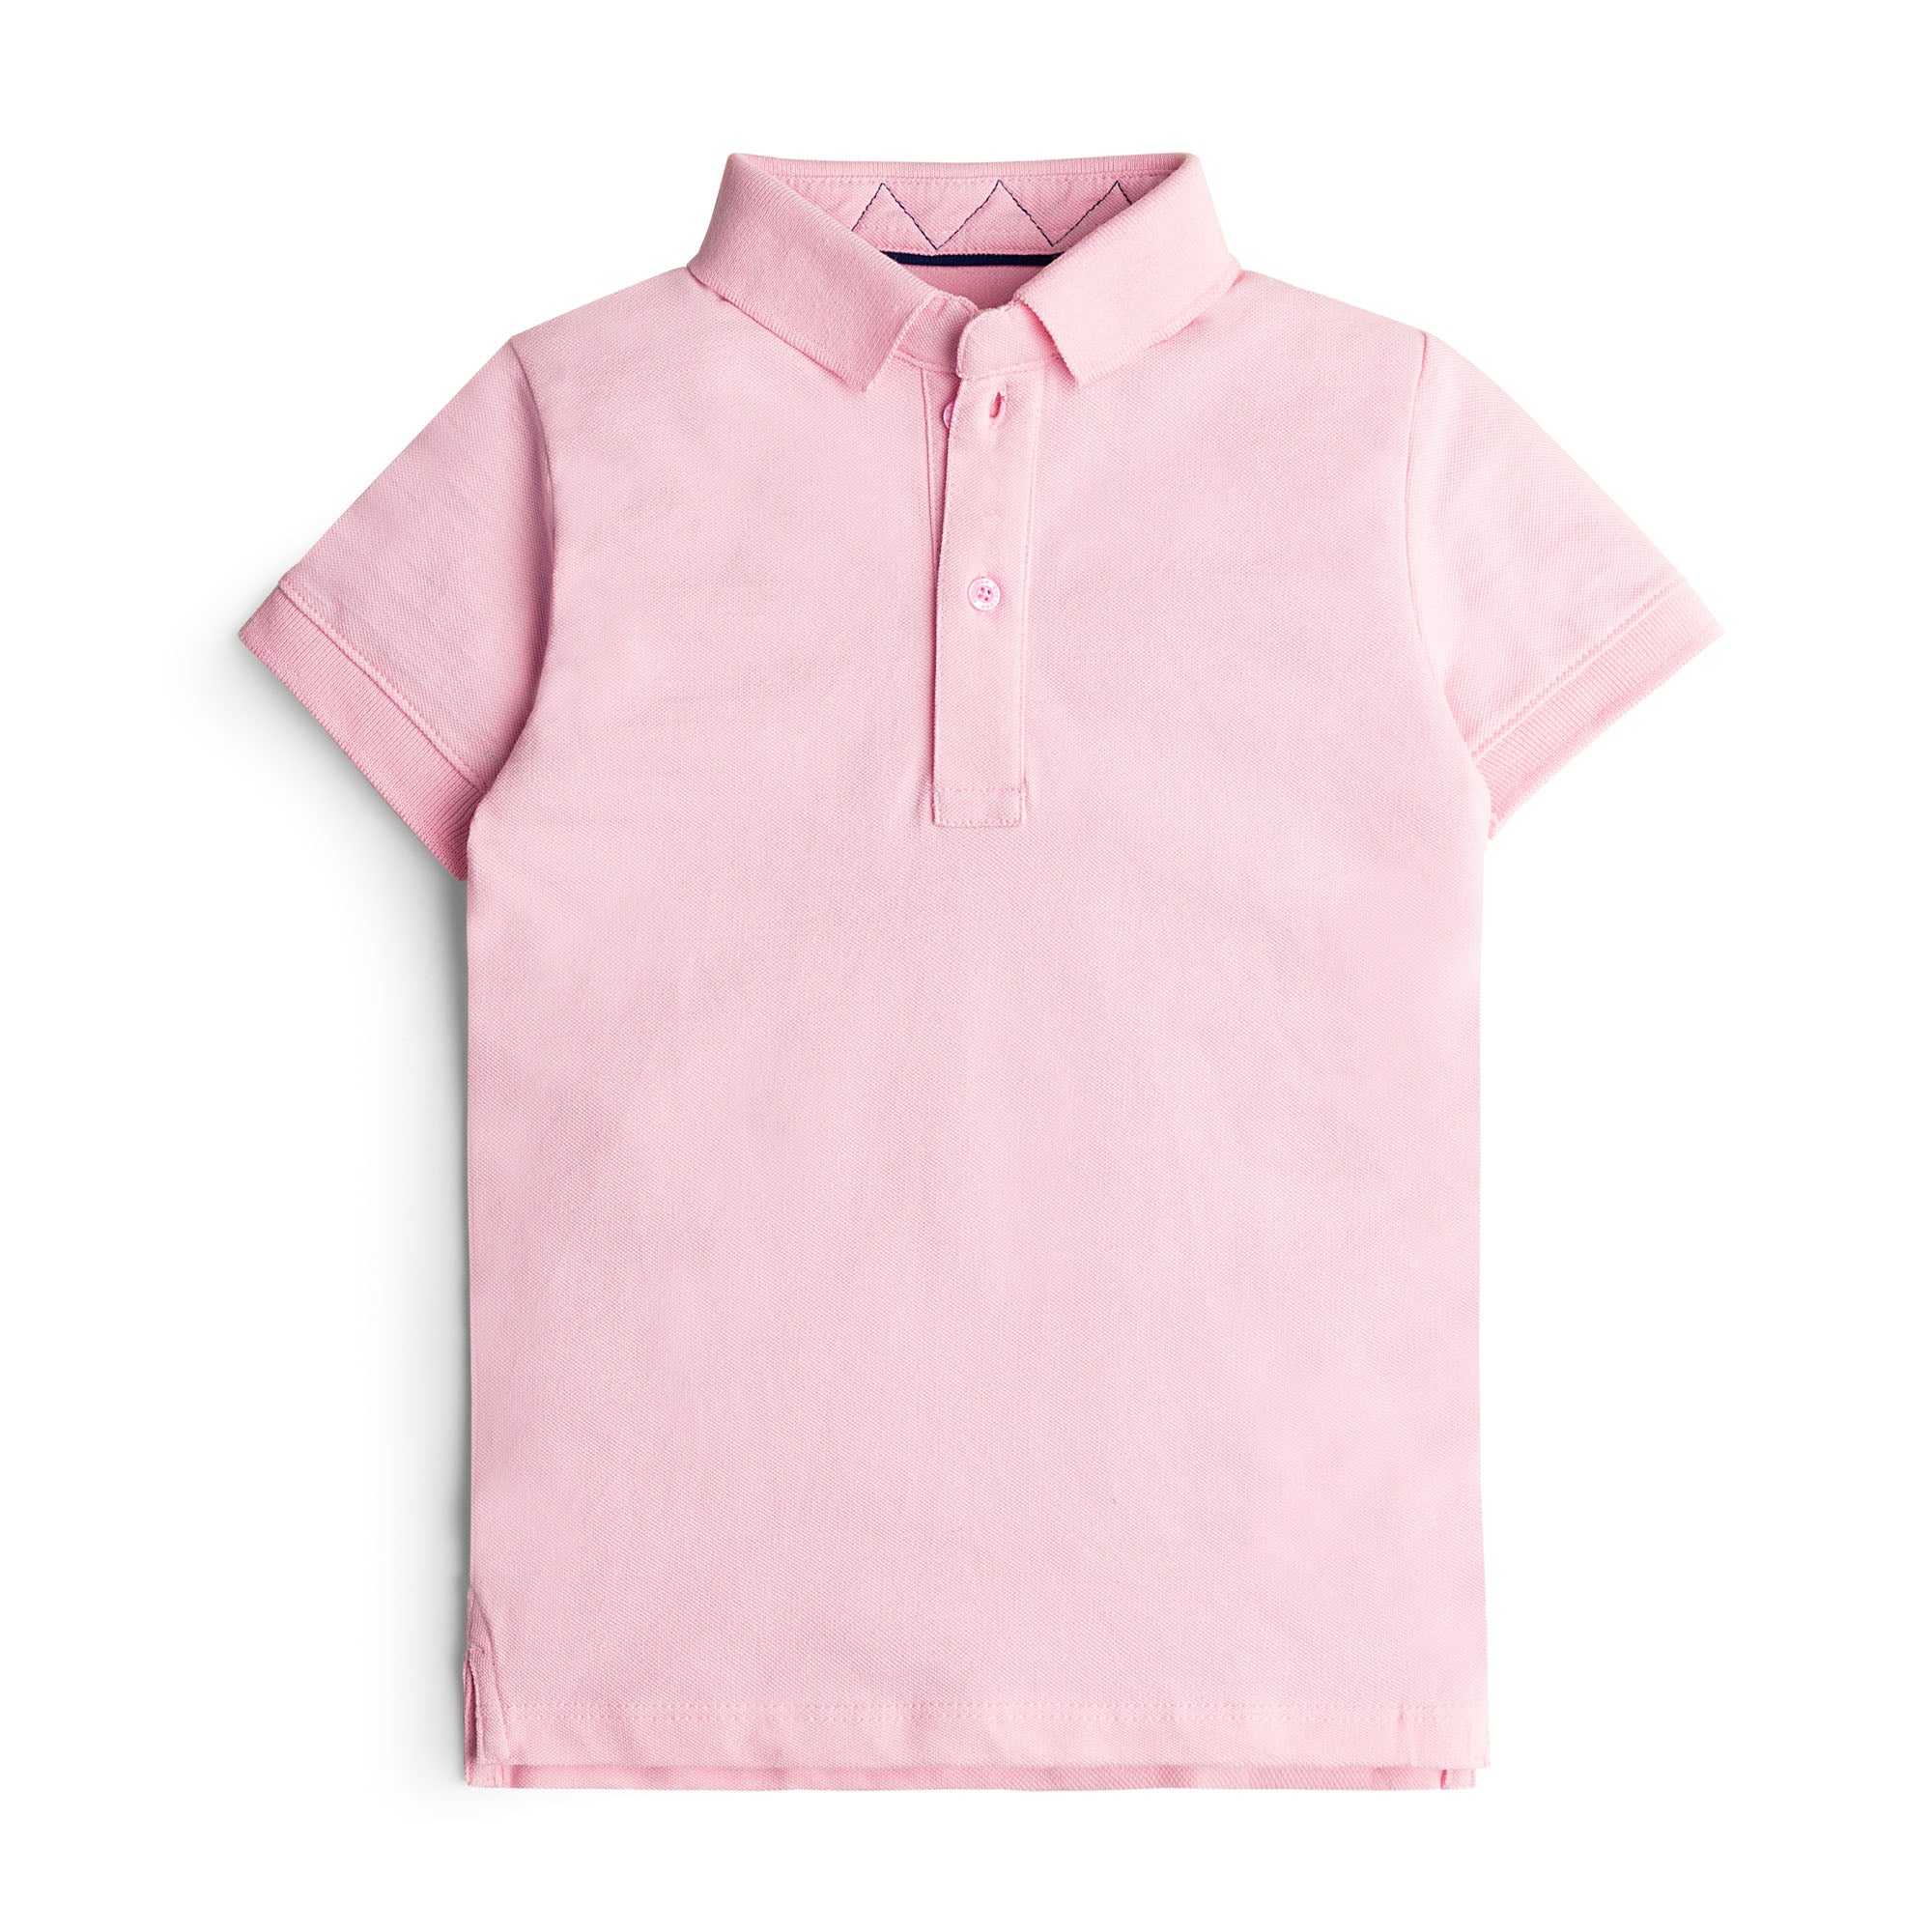 Solid Pink Polo